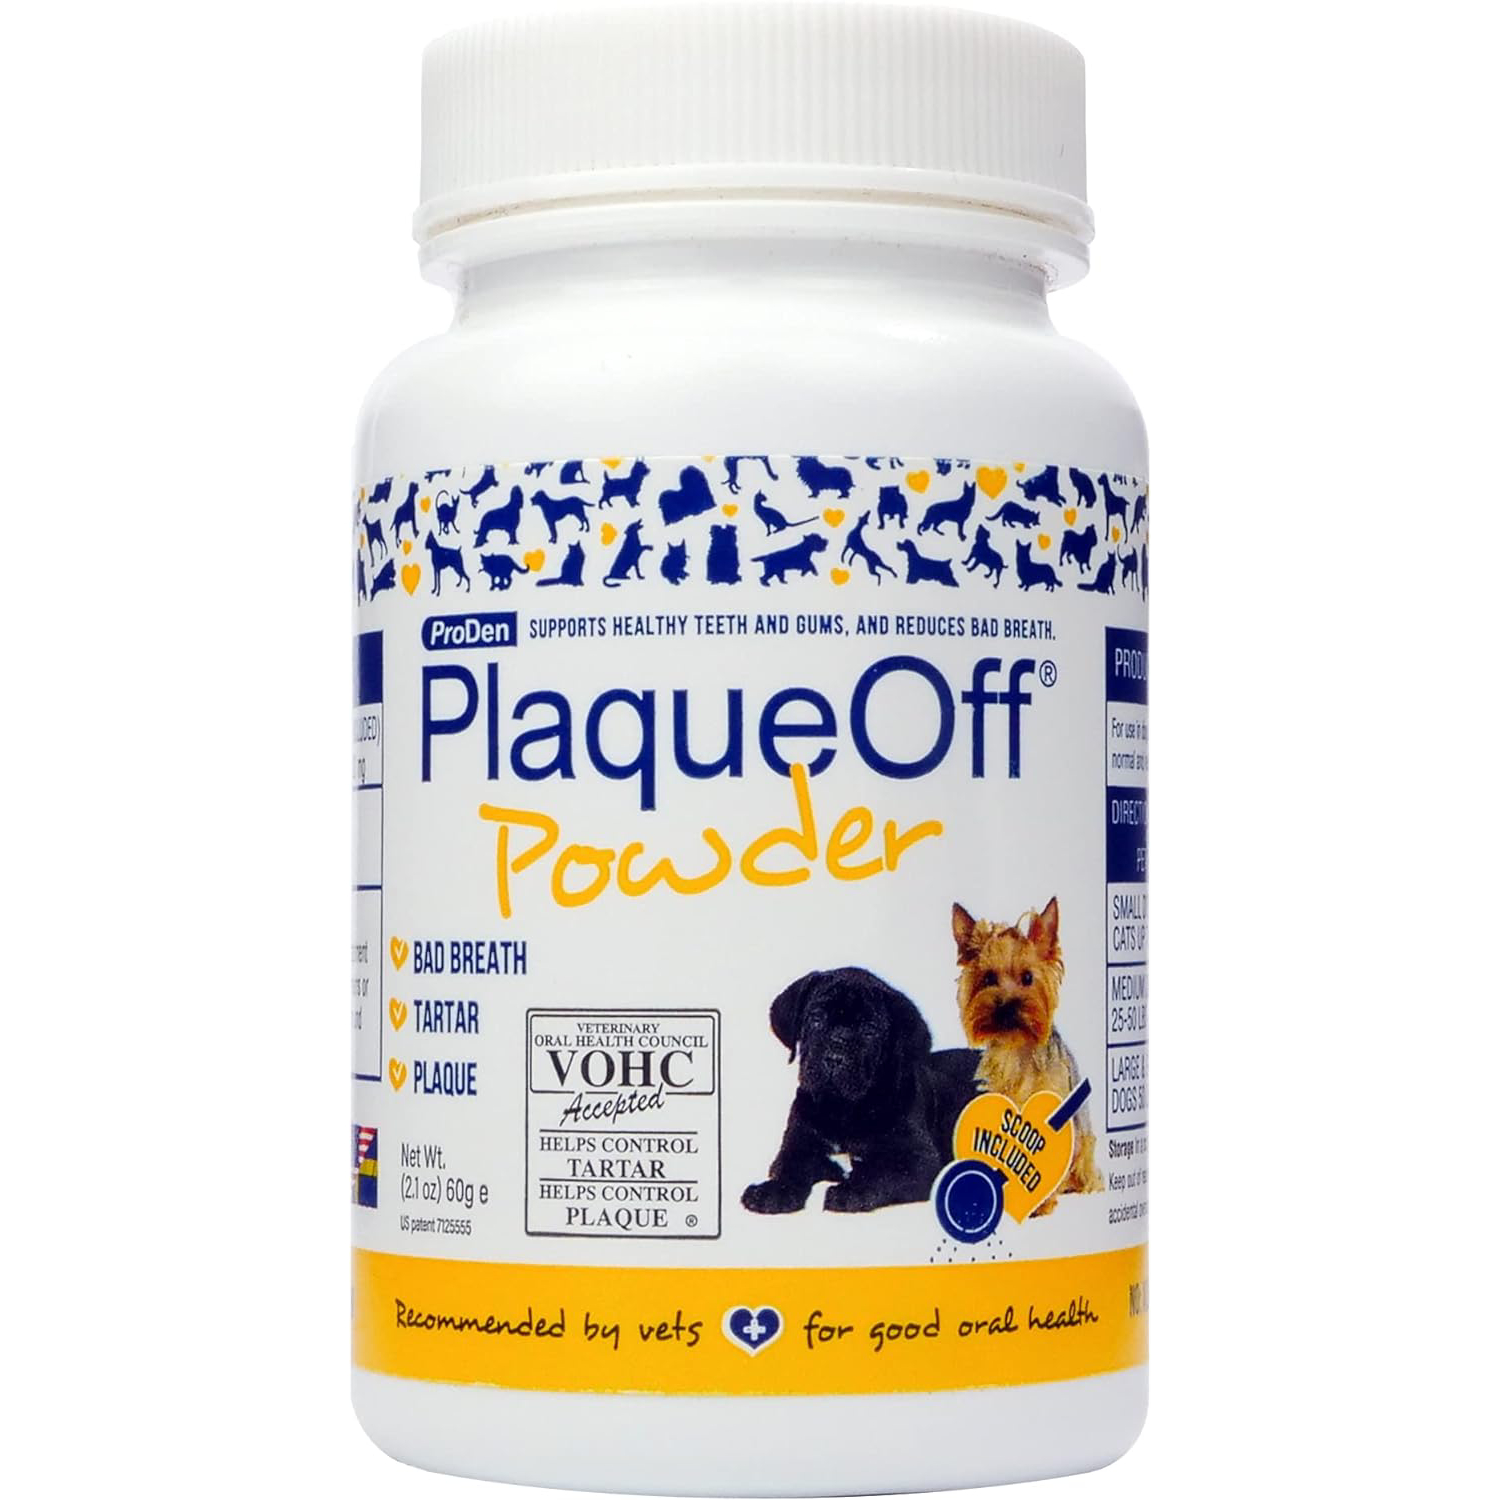 ProDen PlaqueOff Powder for Pets - Cat & Dog Breath Freshener - Plaque & Tartar Remover for Pet Oral Care - Supports Healthy Mouth for Dogs - 60g New